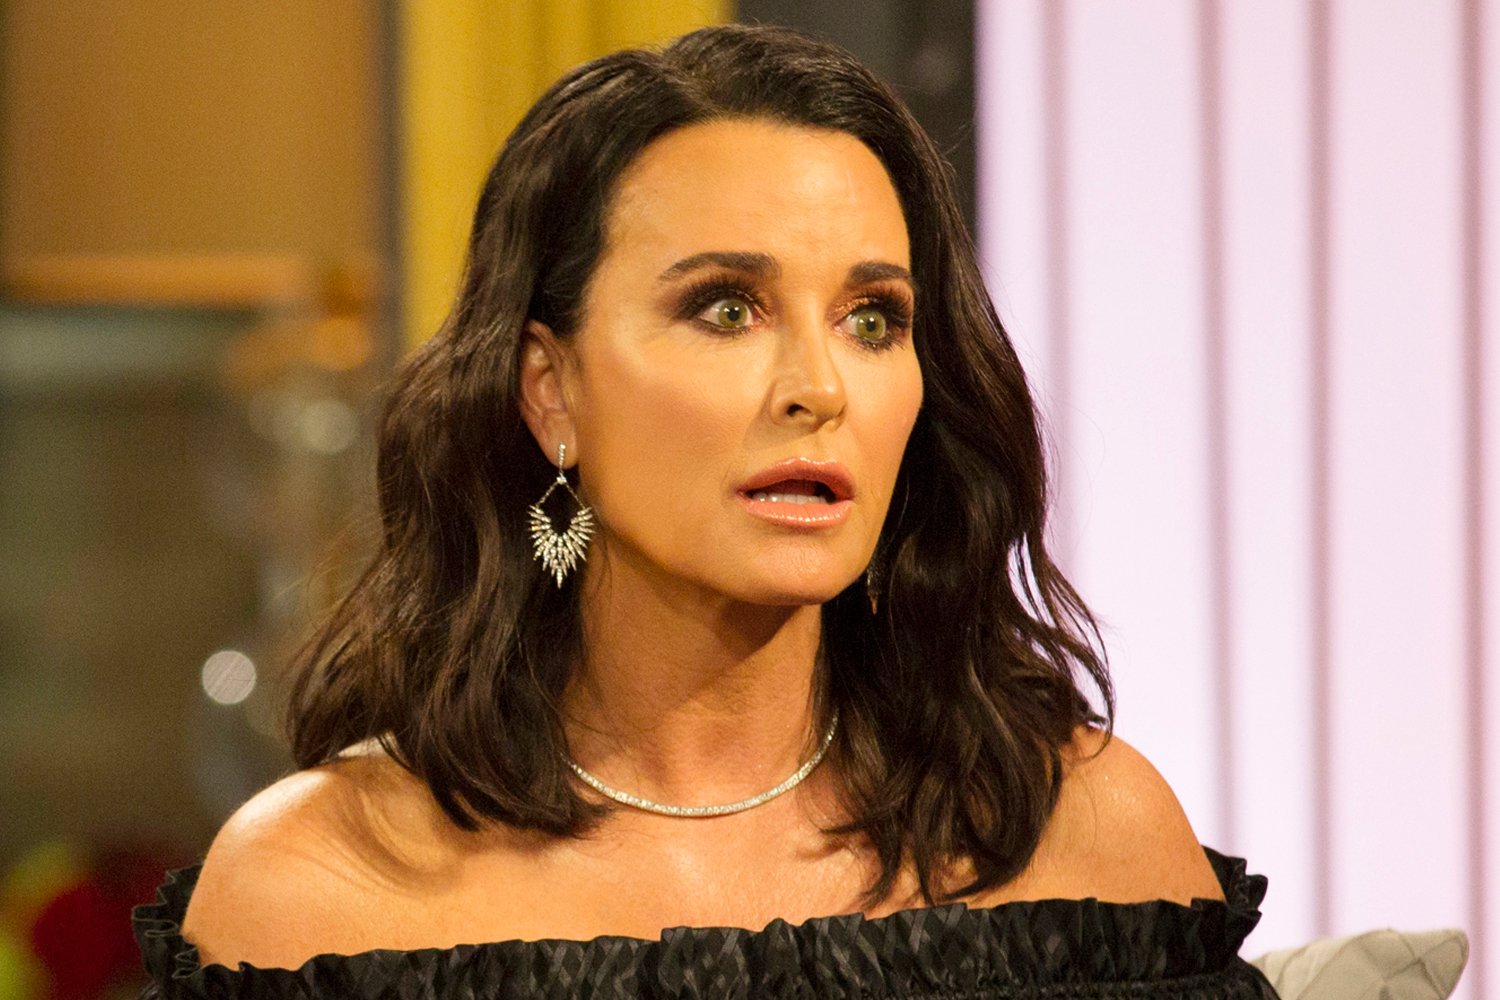 Rhobh Queen Kyle Richards Hospitalized After Getting Stung By Bees Scary Incident Was Caught